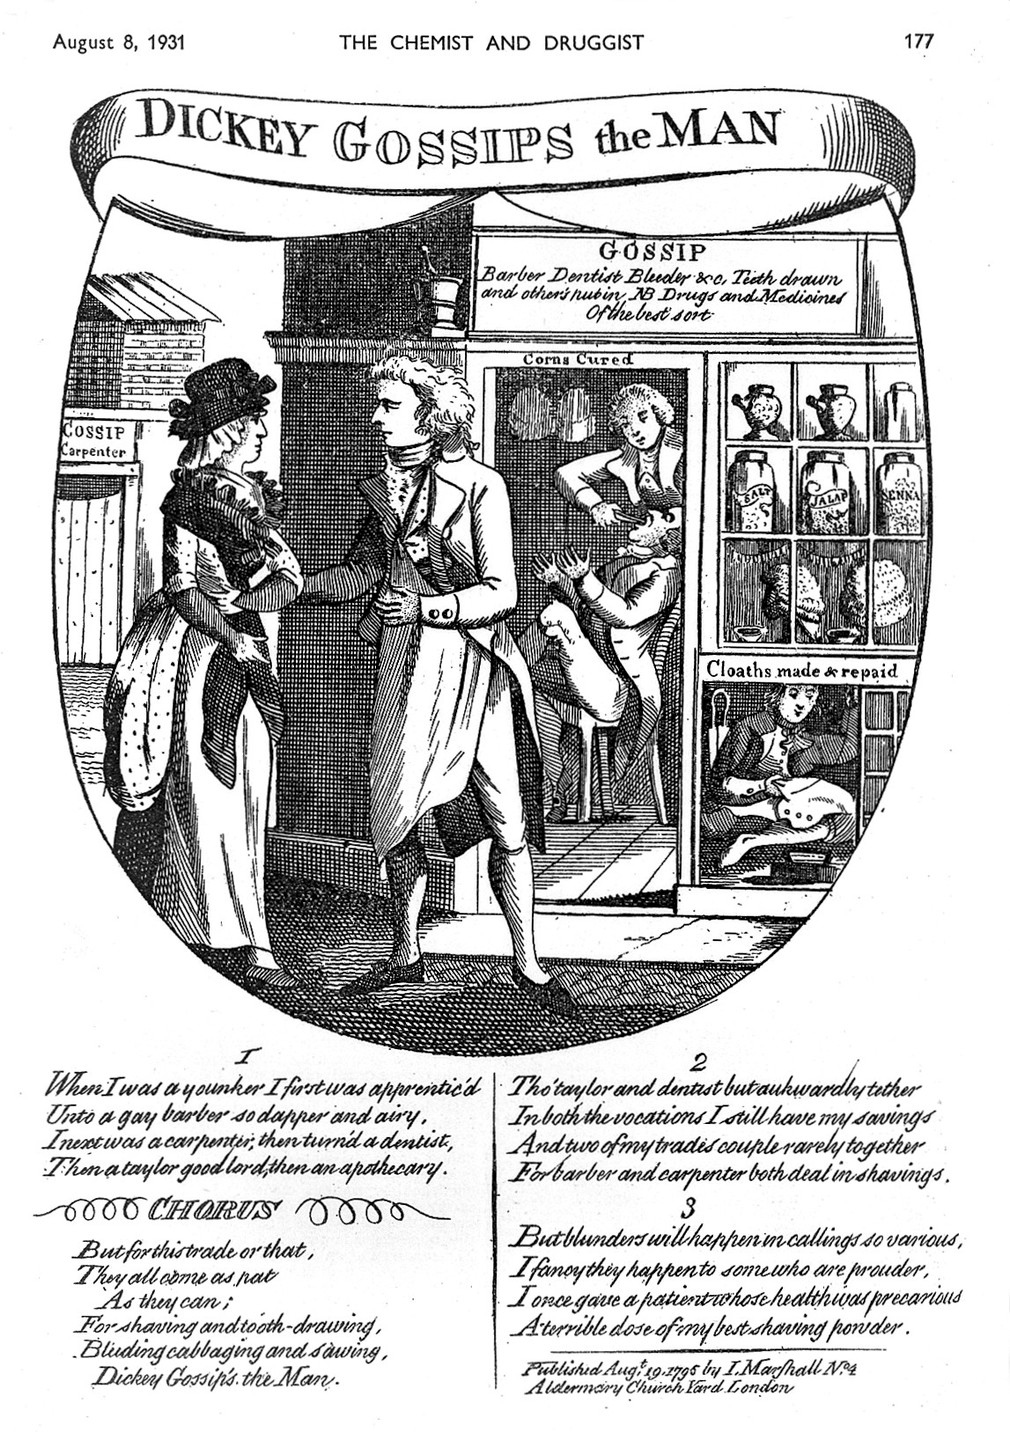 The image is an excerpt from a publication called 'The Alchemist and Druggist'. The main image is an etching of the facade of shop which is a bleeder, apothecary, tooth drawer and barber.  Through the door of the shop you can see a man having his tooth pulled by a dentist and the windows are full of jars.  A woman and a man talk outside the shop. The banner above reads 'Dickey Gossips the man'